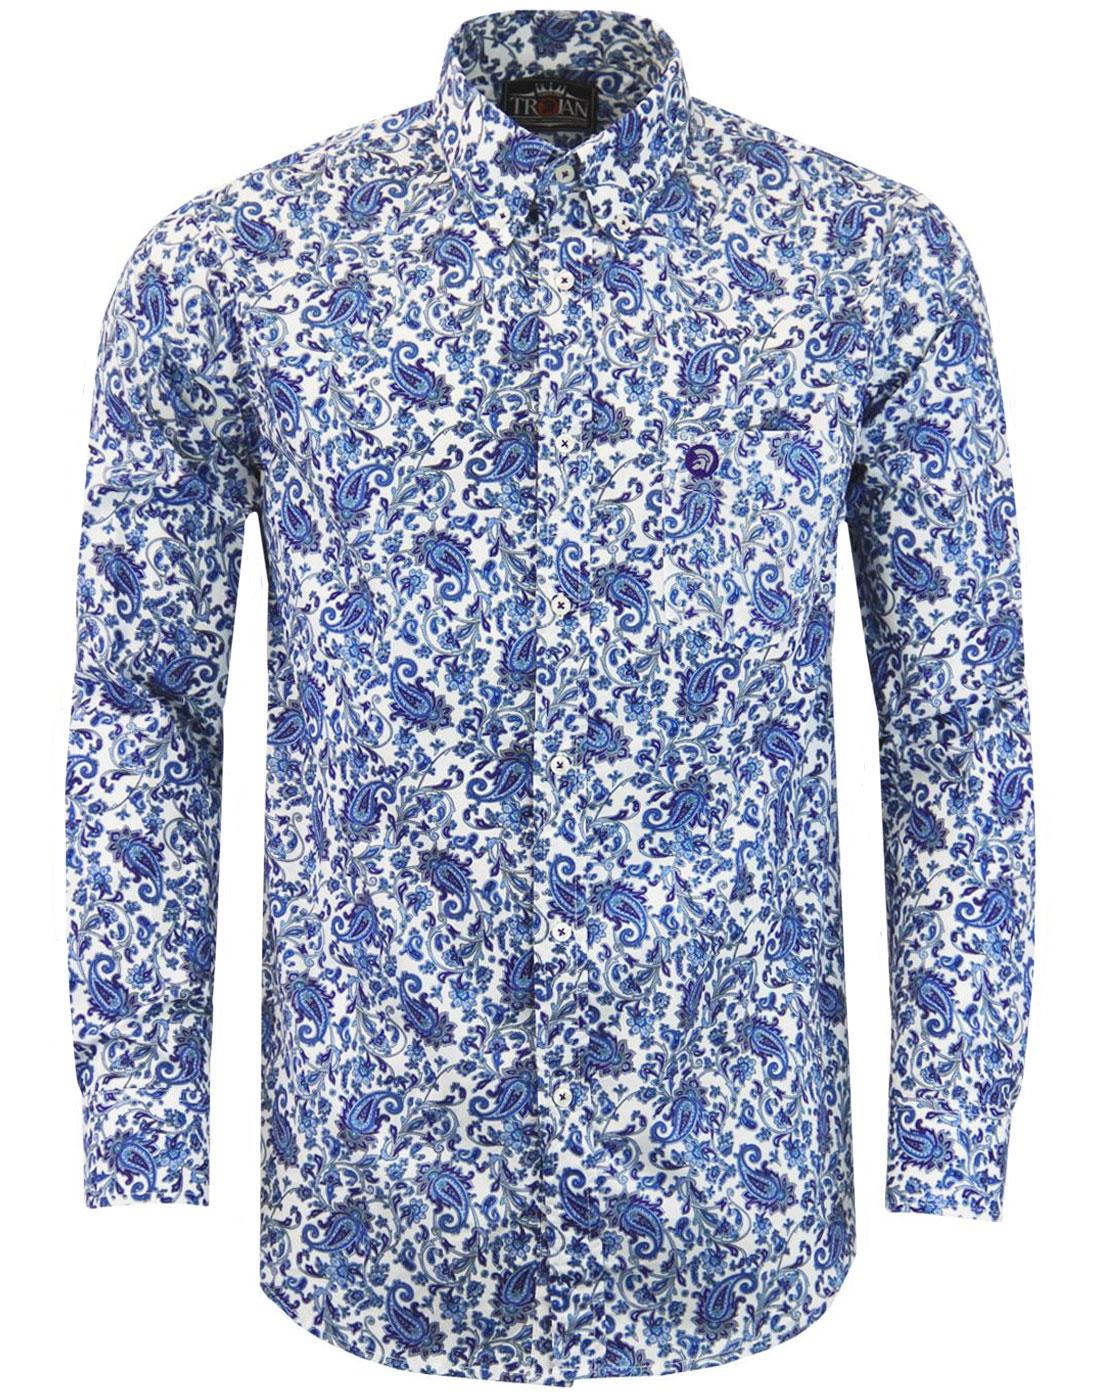 TROJAN RECORDS 1960s Mod Floral Paisley Psychedelic Shirt White